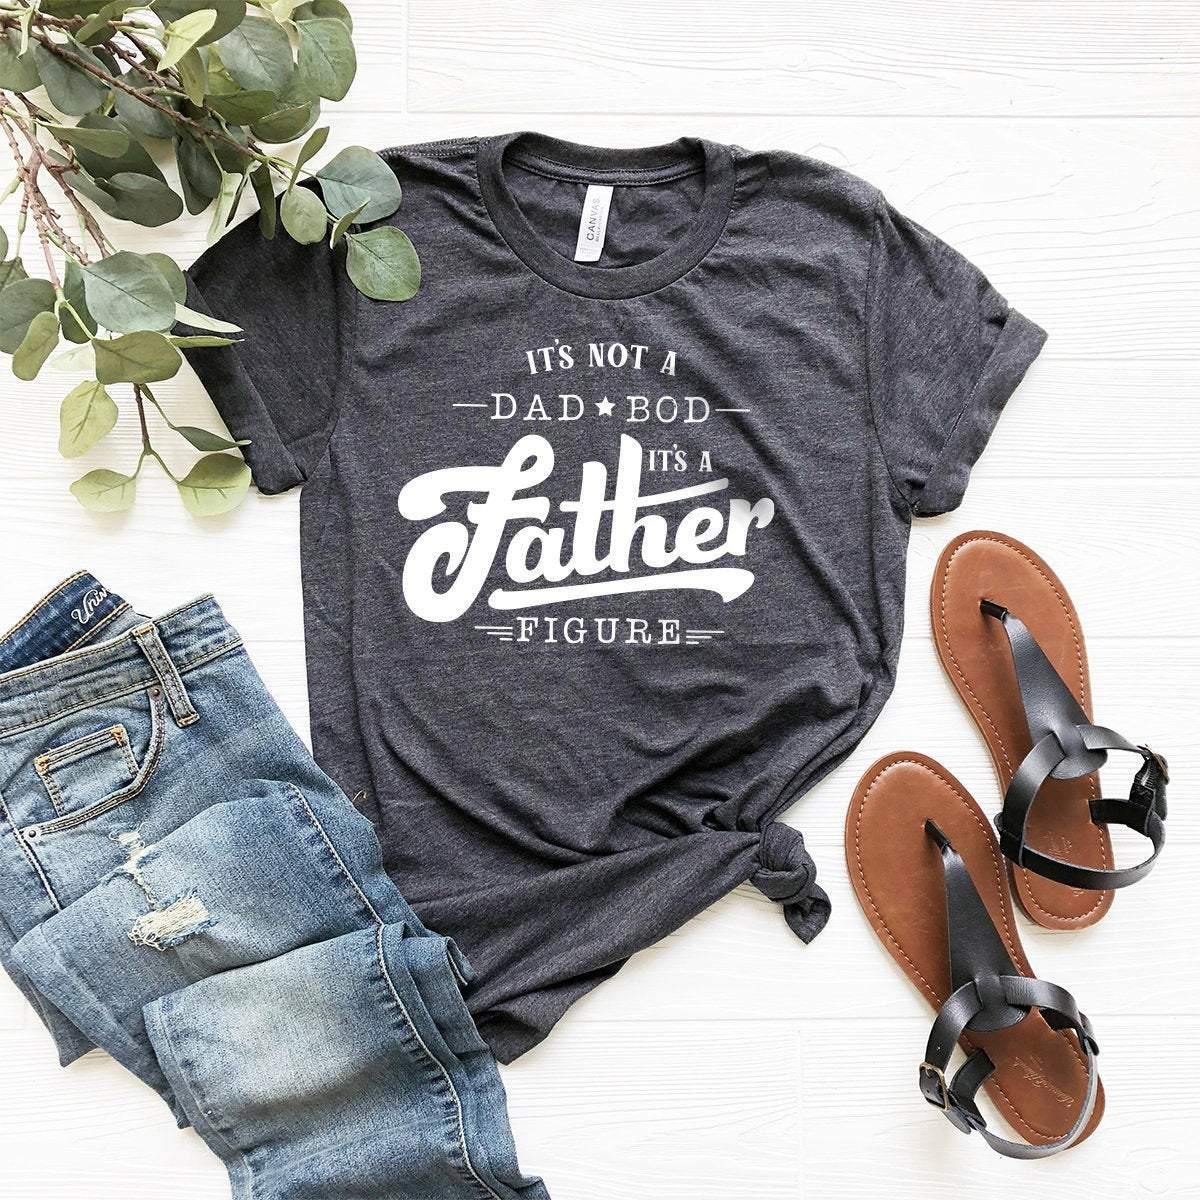 Funny Dad Tshirt, Dad Bod Shirt, Father Shirt Gift, It's Not A Dad Bod It's A Father Figure Shirt, Gift For Daddy, Best Dad Gifts - Fastdeliverytees.com